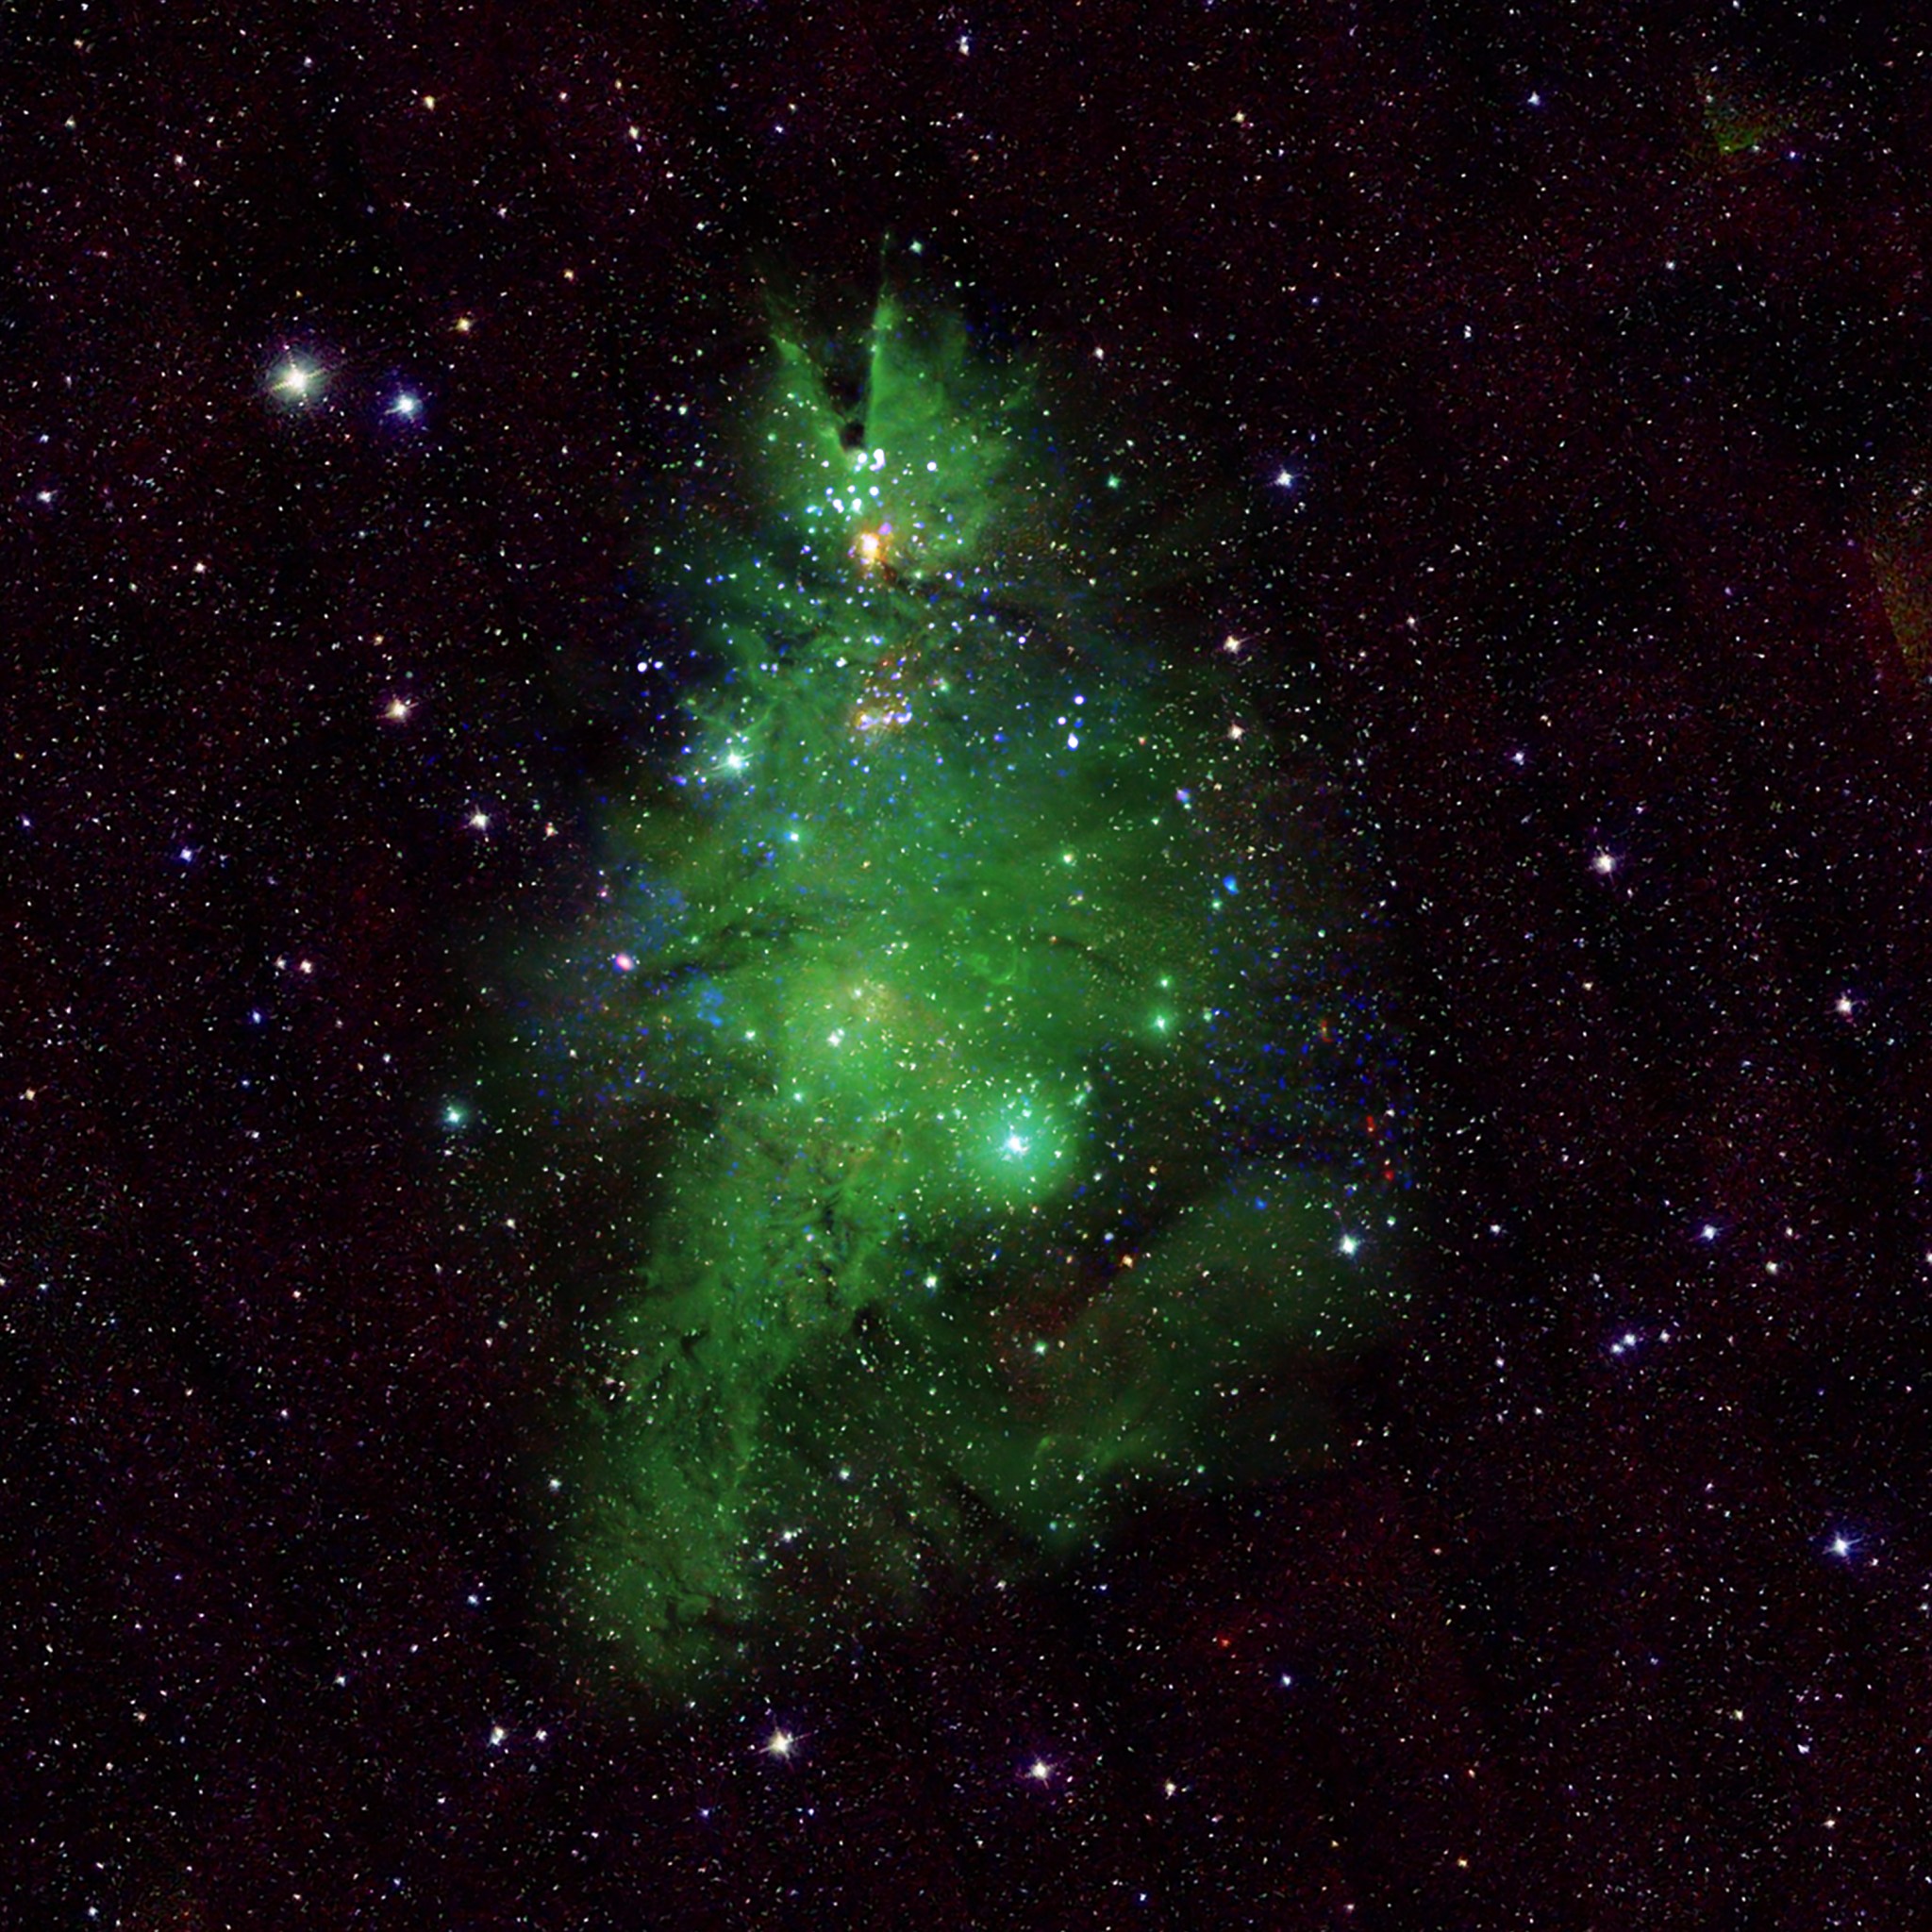 This composite image shows the Christmas Tree Cluster. The blue and white lights (which blink in the animated version of this image) are young stars that give off X-rays detected by NASA’s Chandra X-ray Observatory. Optical data from the National Science Foundation’s WIYN 0.9-meter telescope on Kitt Peak shows gas in the nebula in green, corresponding to the “pine needles” of the tree, and infrared data from the Two Micron All Sky Survey shows foreground and background stars in white. This image has been rotated clockwise by about 160 degrees from the astronomer’s standard of North pointing upward, so that it appears like the top of the tree is toward the top of the image.